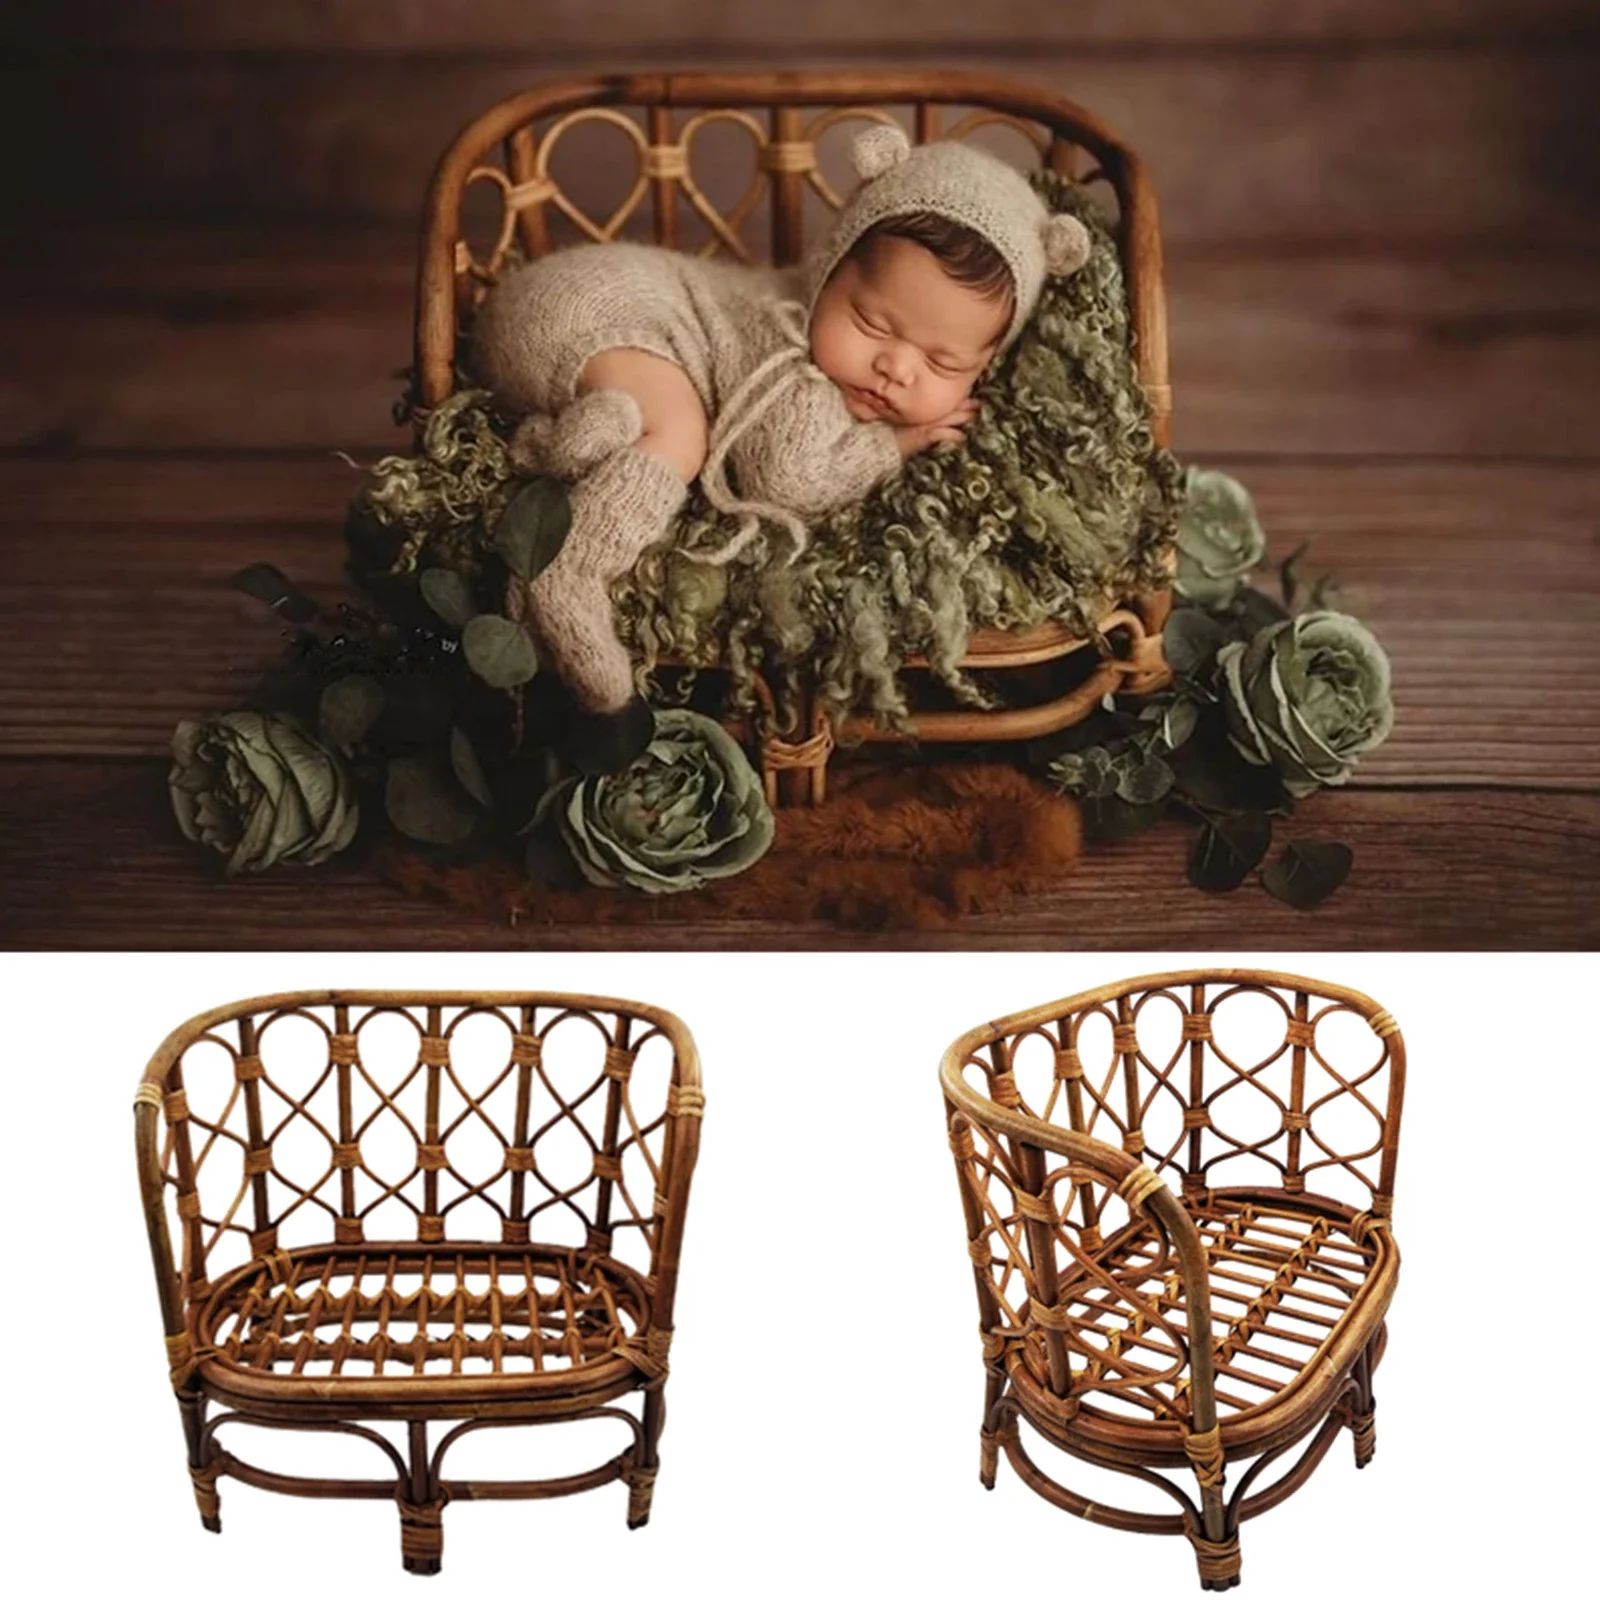 

Newborn Photography Props Bed Bamboo Baby Bamboo Bench Rattan Basket Container Infant Pose Baby Shooting Studio Accessories